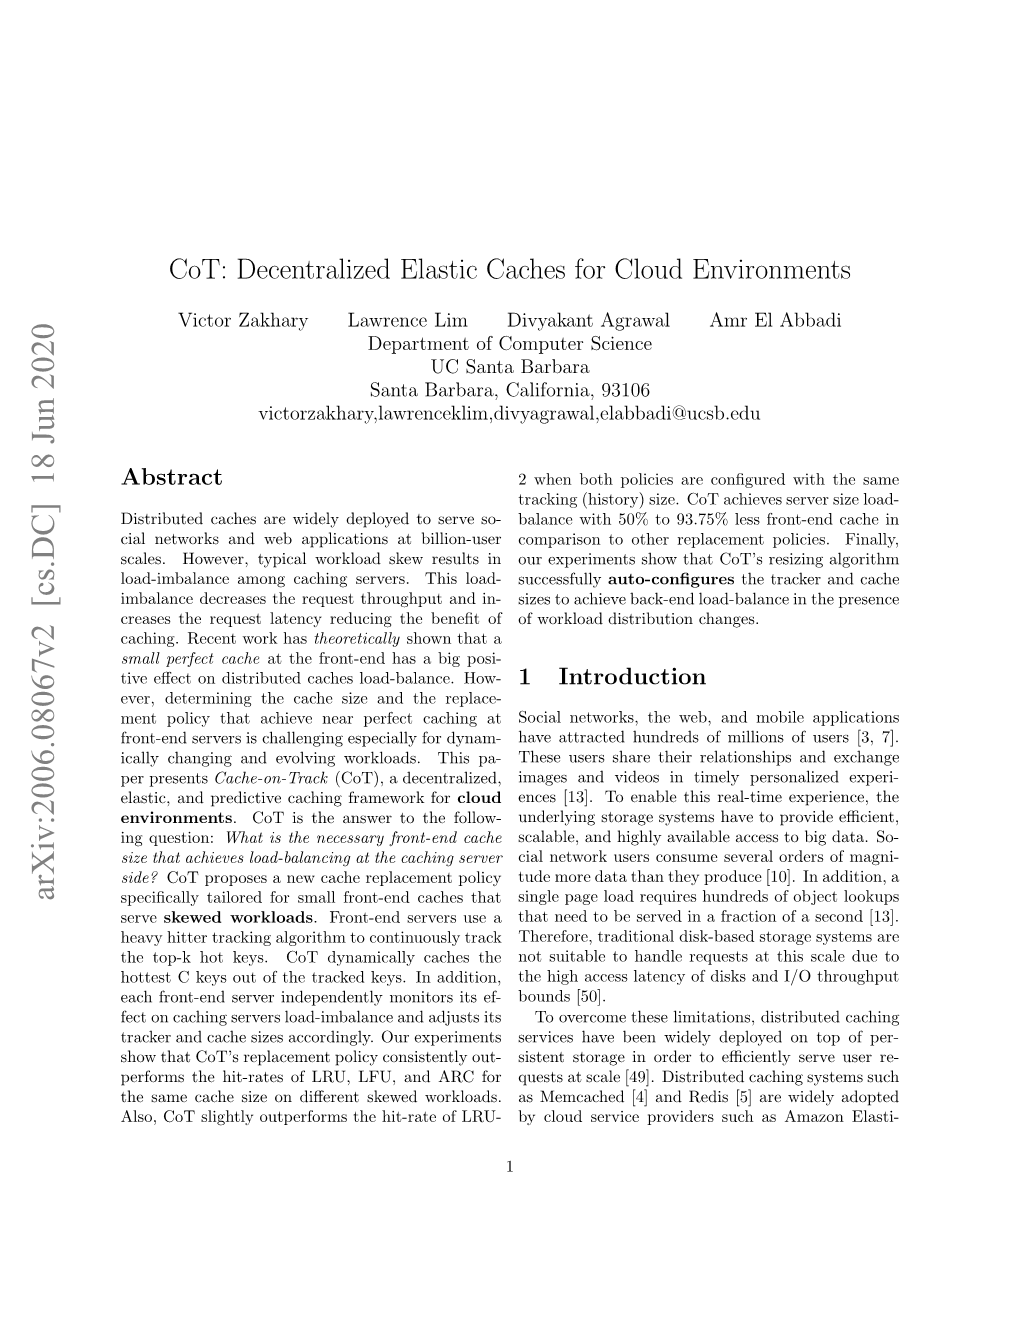 Cot: Decentralized Elastic Caches for Cloud Environments